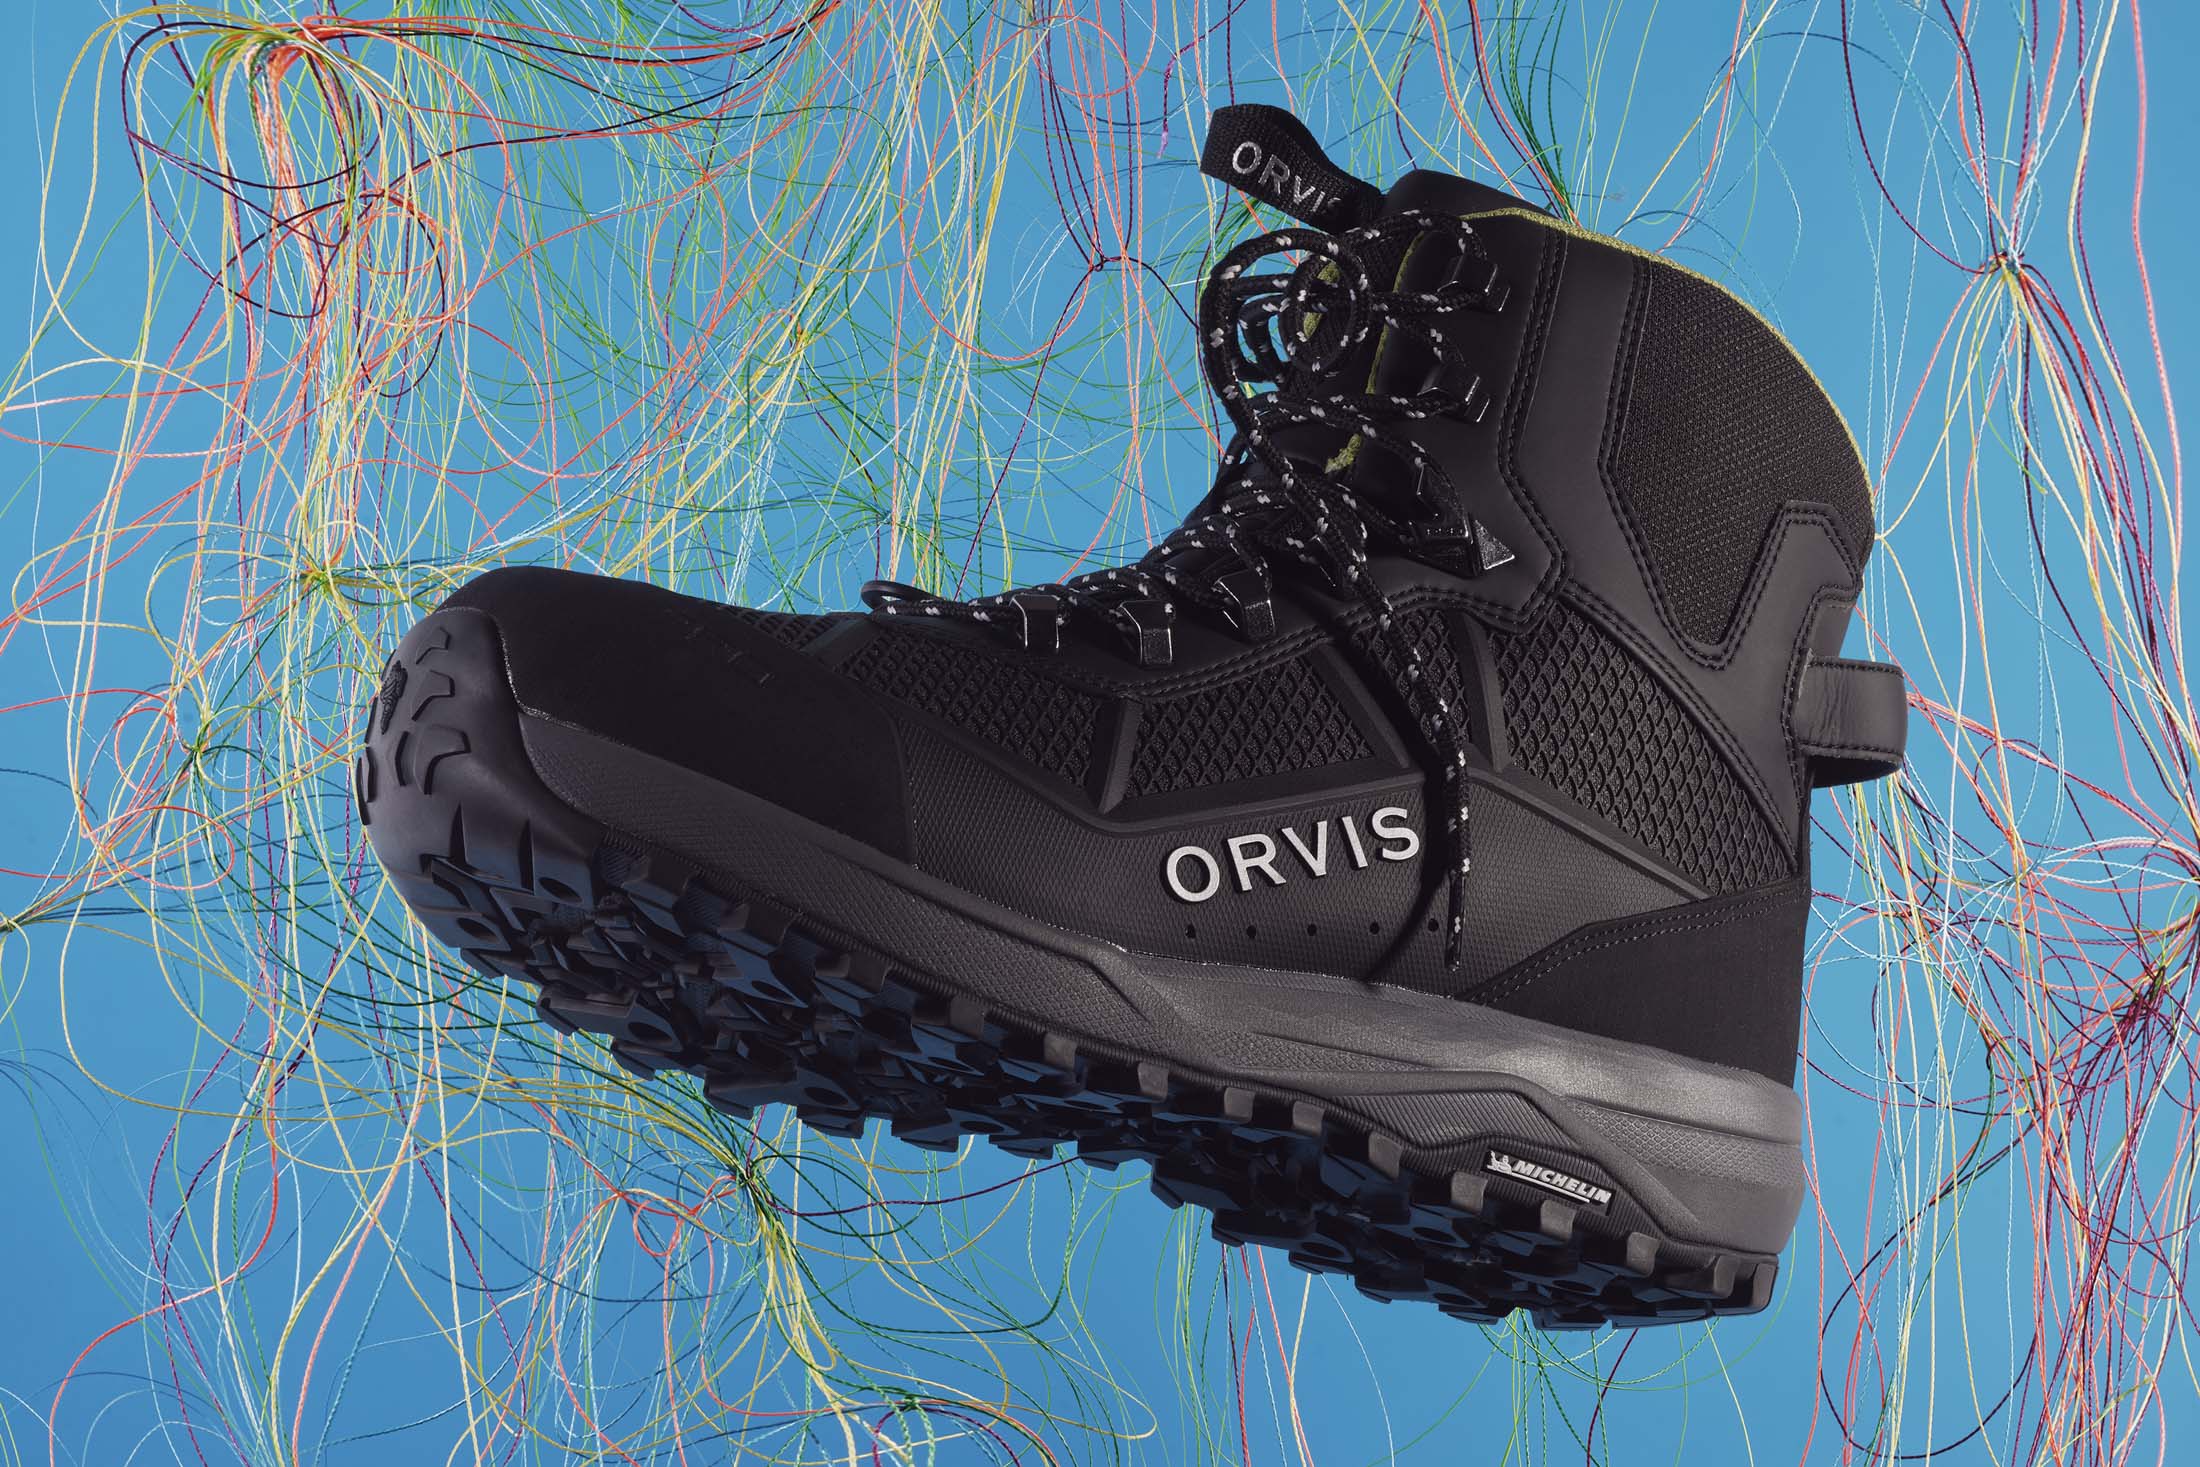 Review of Simms G3 Wading Boots: Built for the Long Haul - Guide Recommended